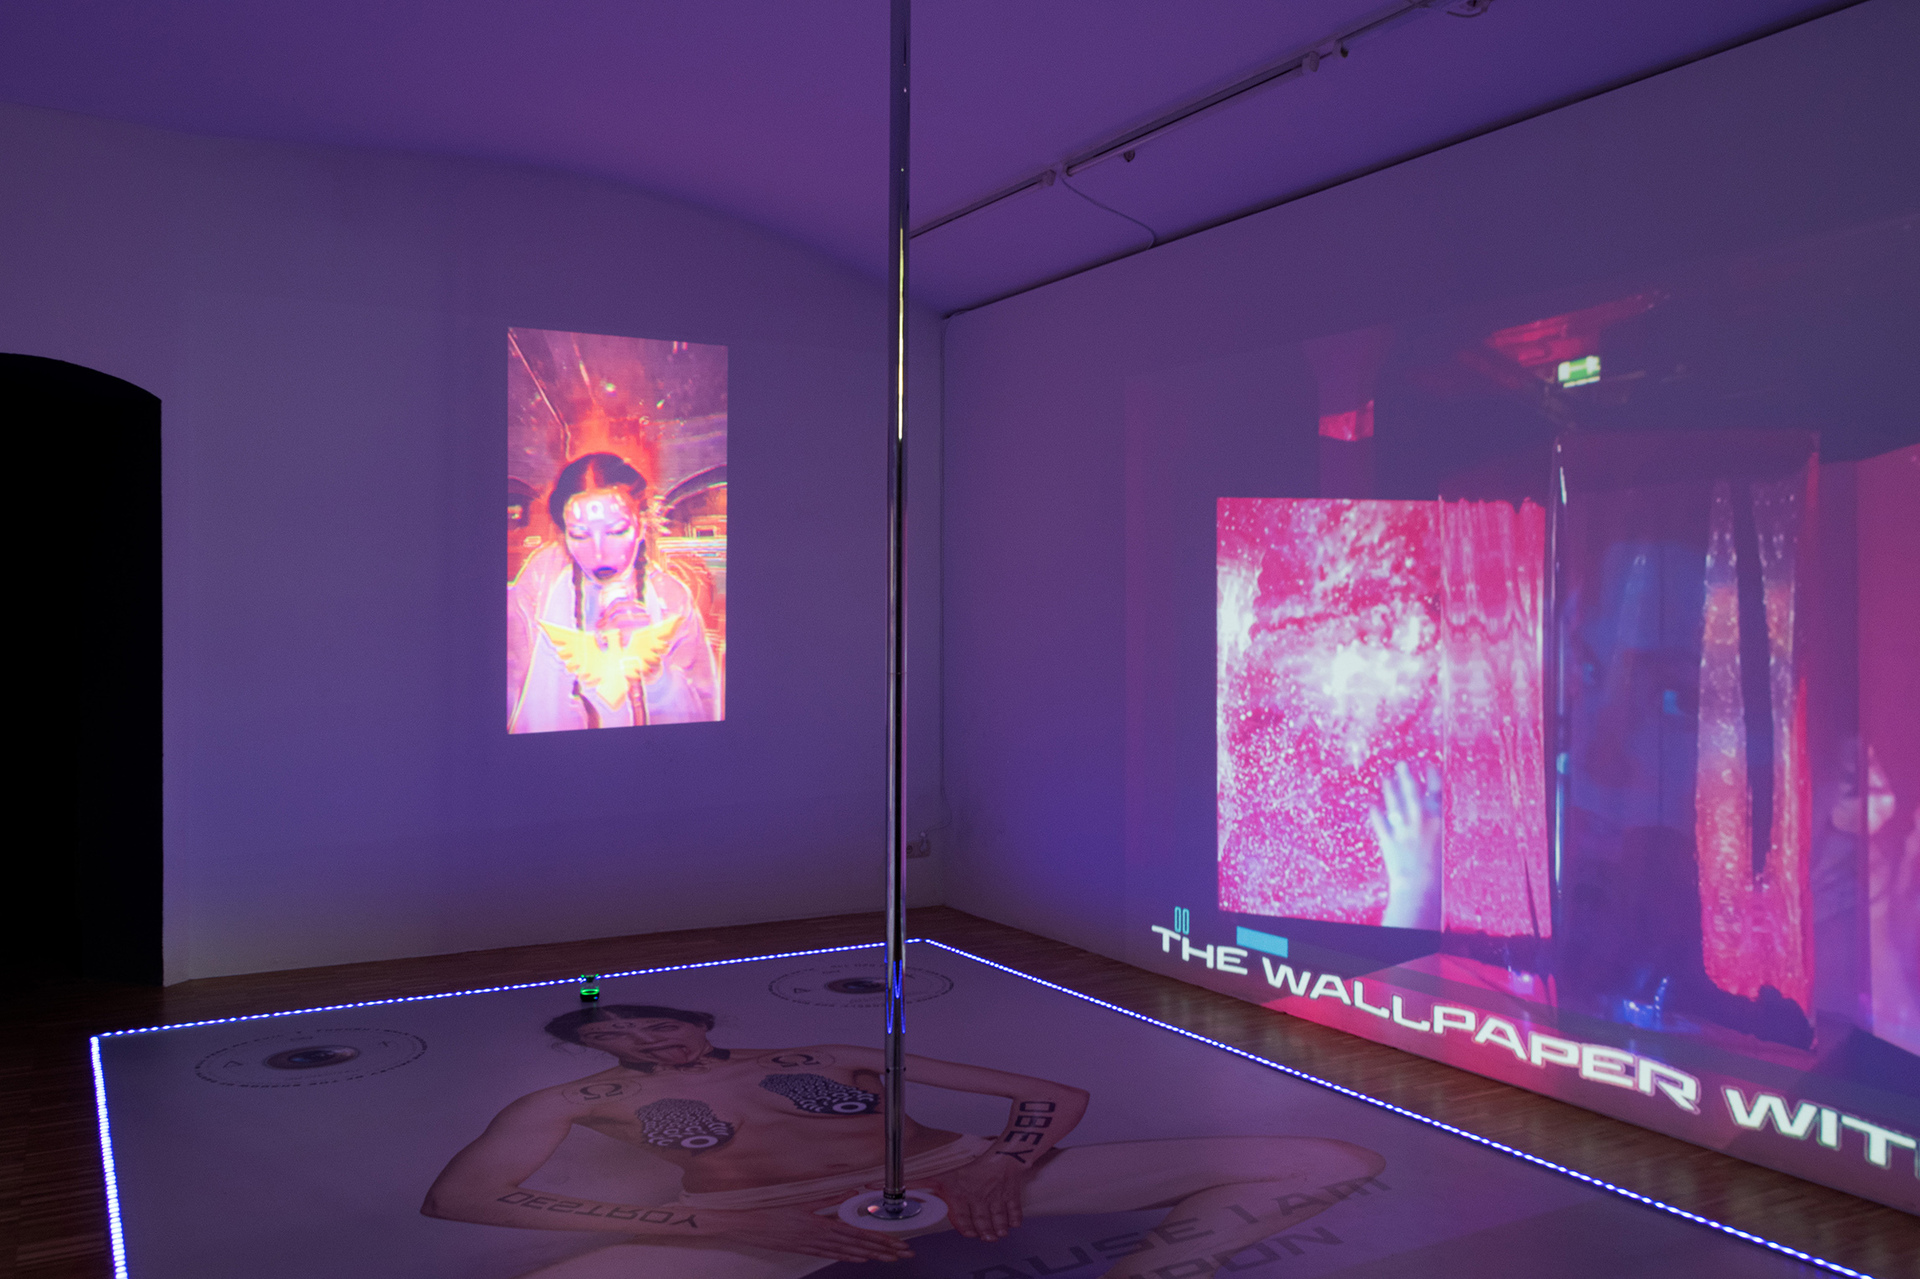 Denise Blickhan, Medusa X (Iconoclasms), 2021/2022, Performance and mixed media installation with plastic curtain, dance pole, vinyl floor, video, sound, Dimensions variable